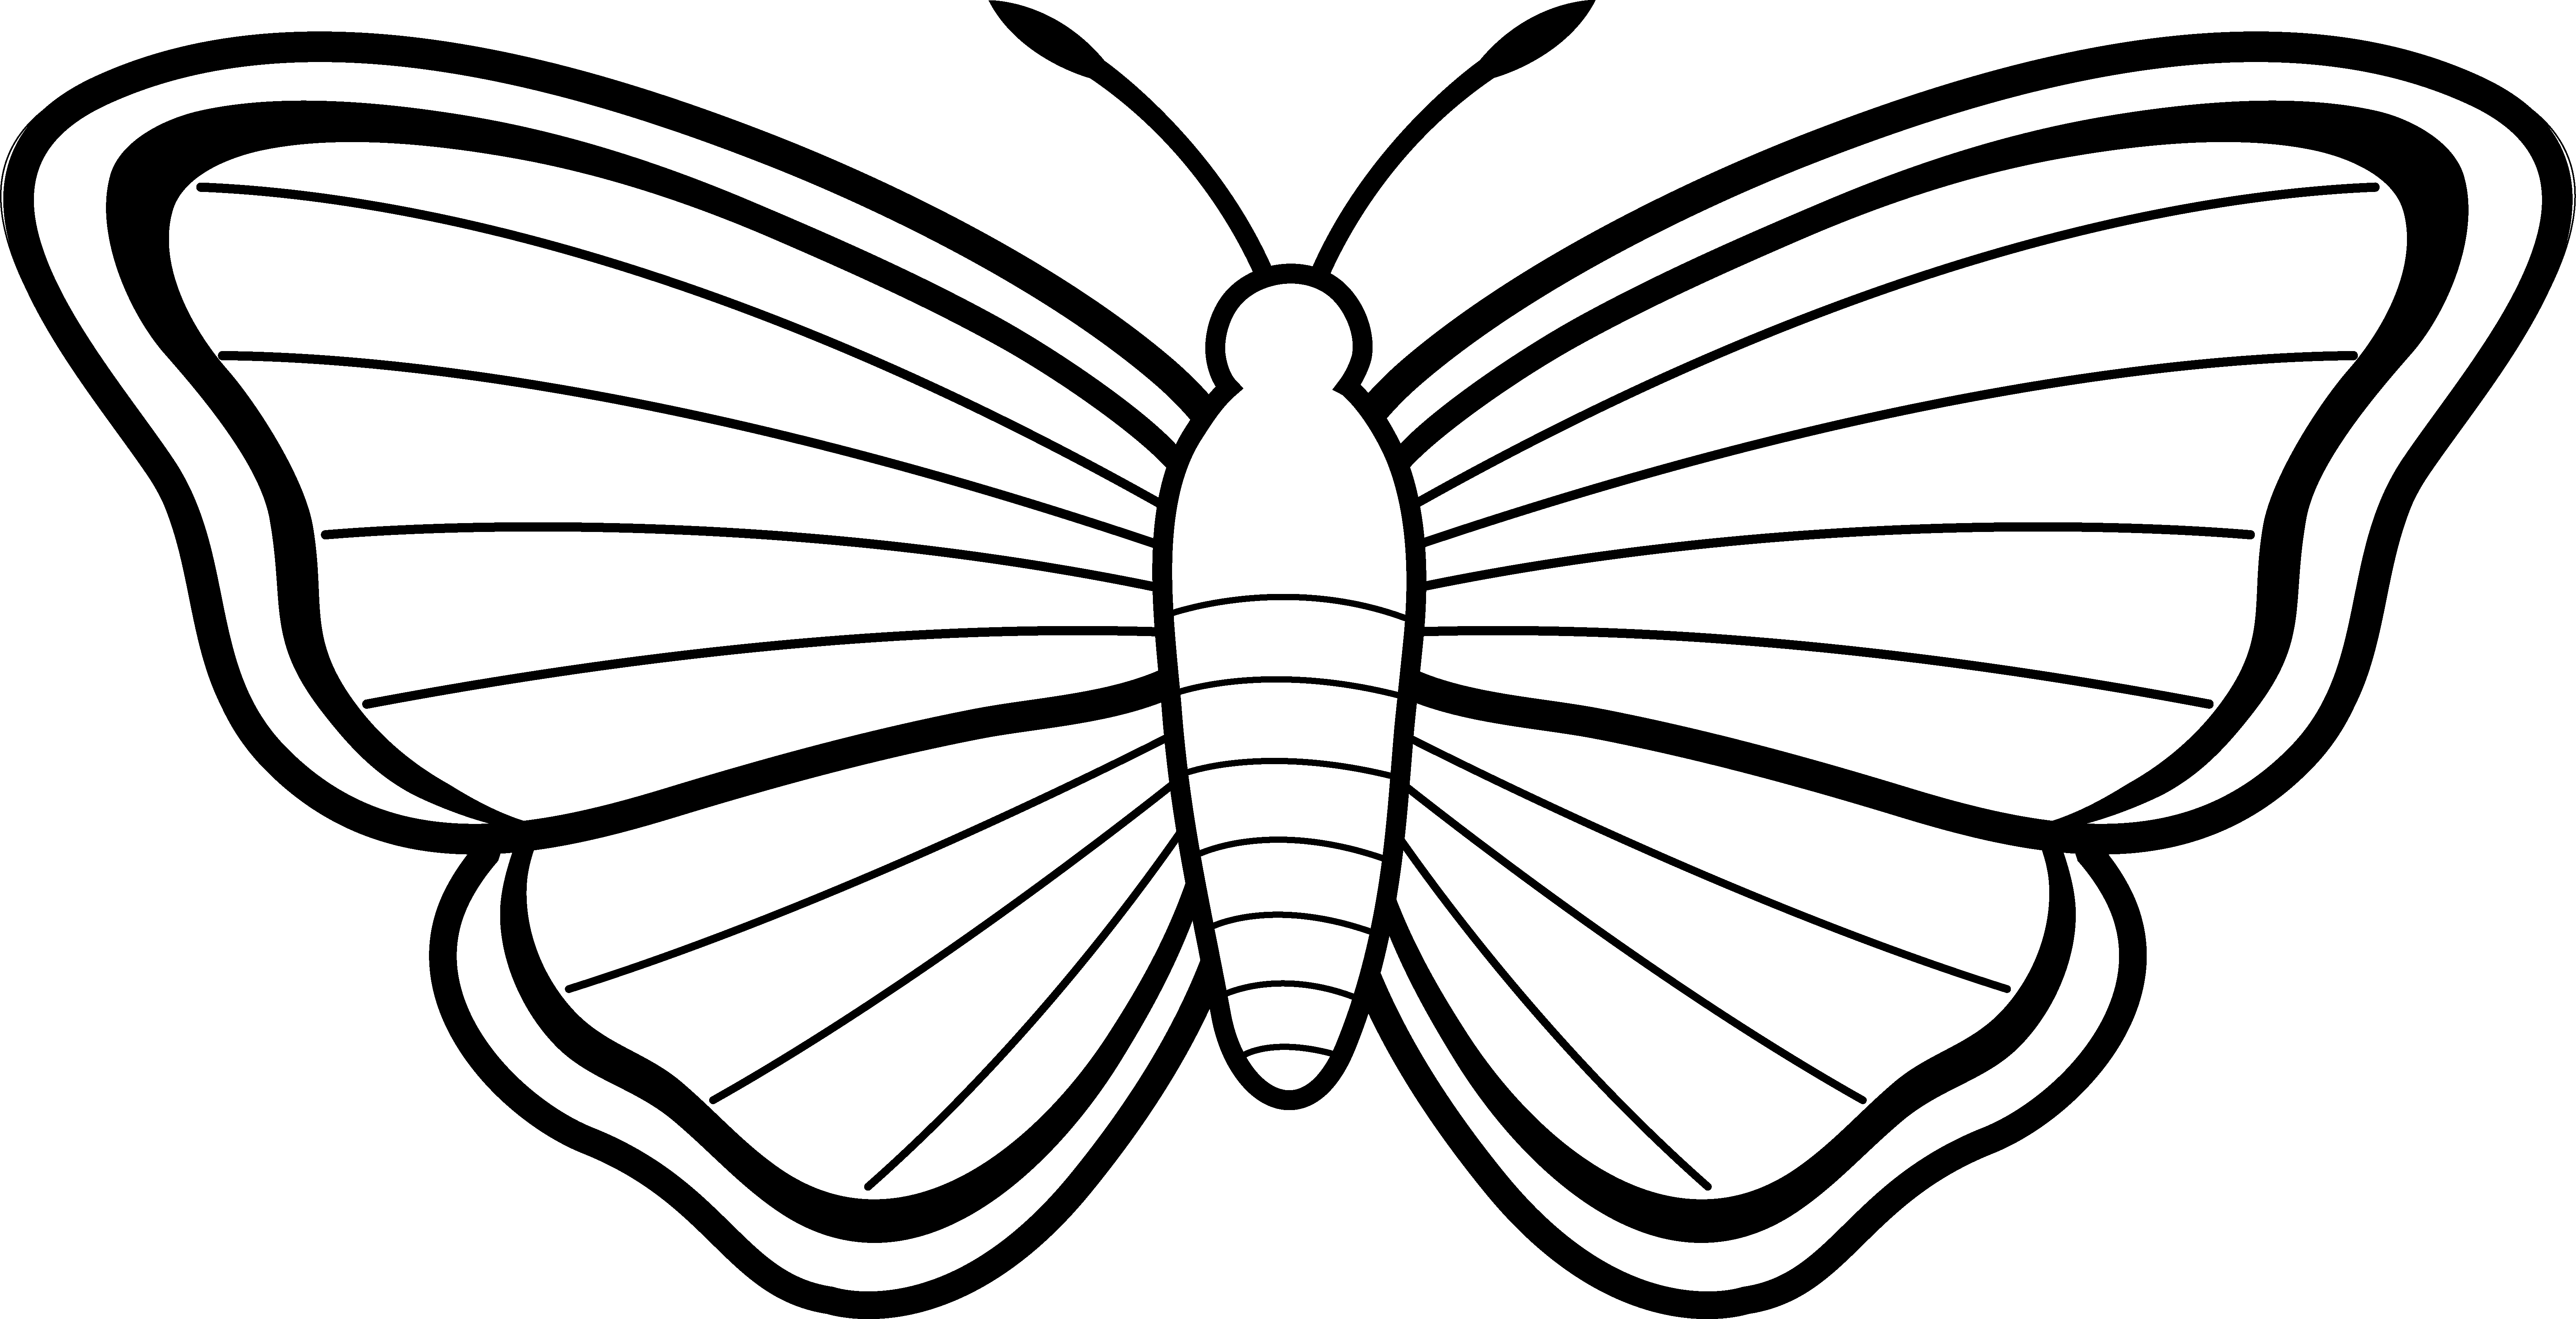 Butterfly Outline Black And White - Clipart library